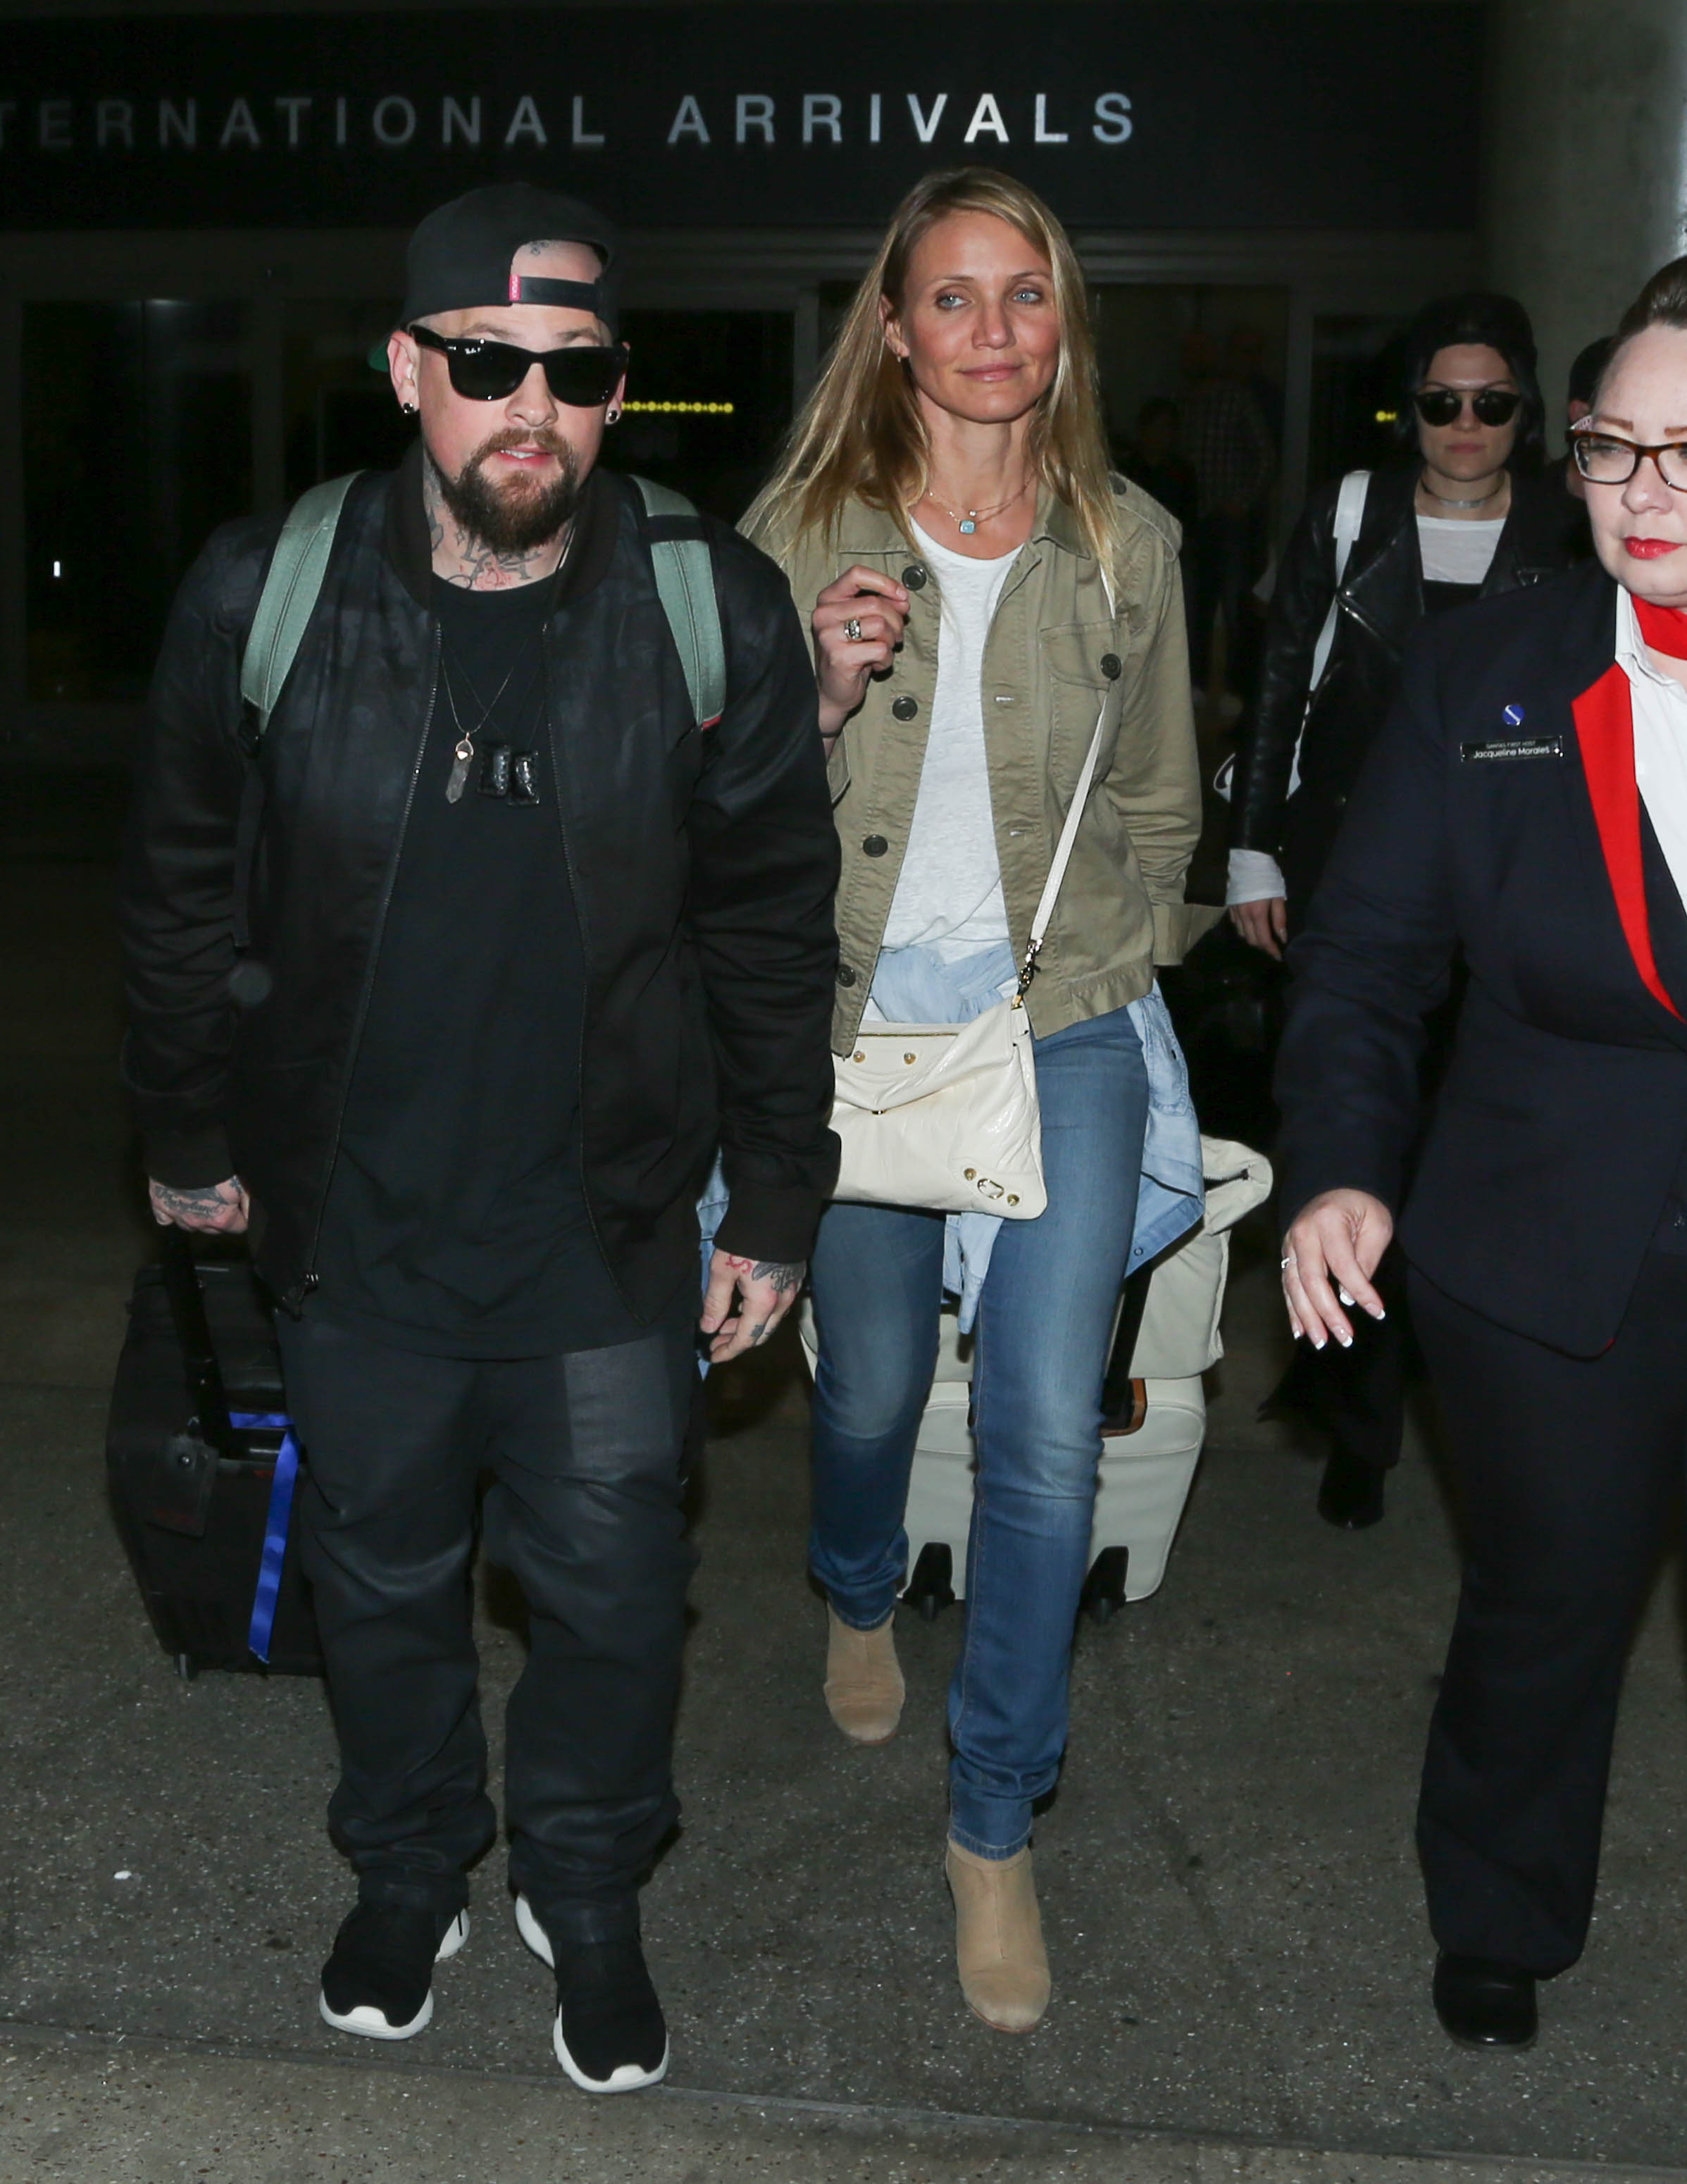 Cameron Diaz, Benji Madden, and Jessie J at LAX. on August 31, 2015 | Source: Getty Images